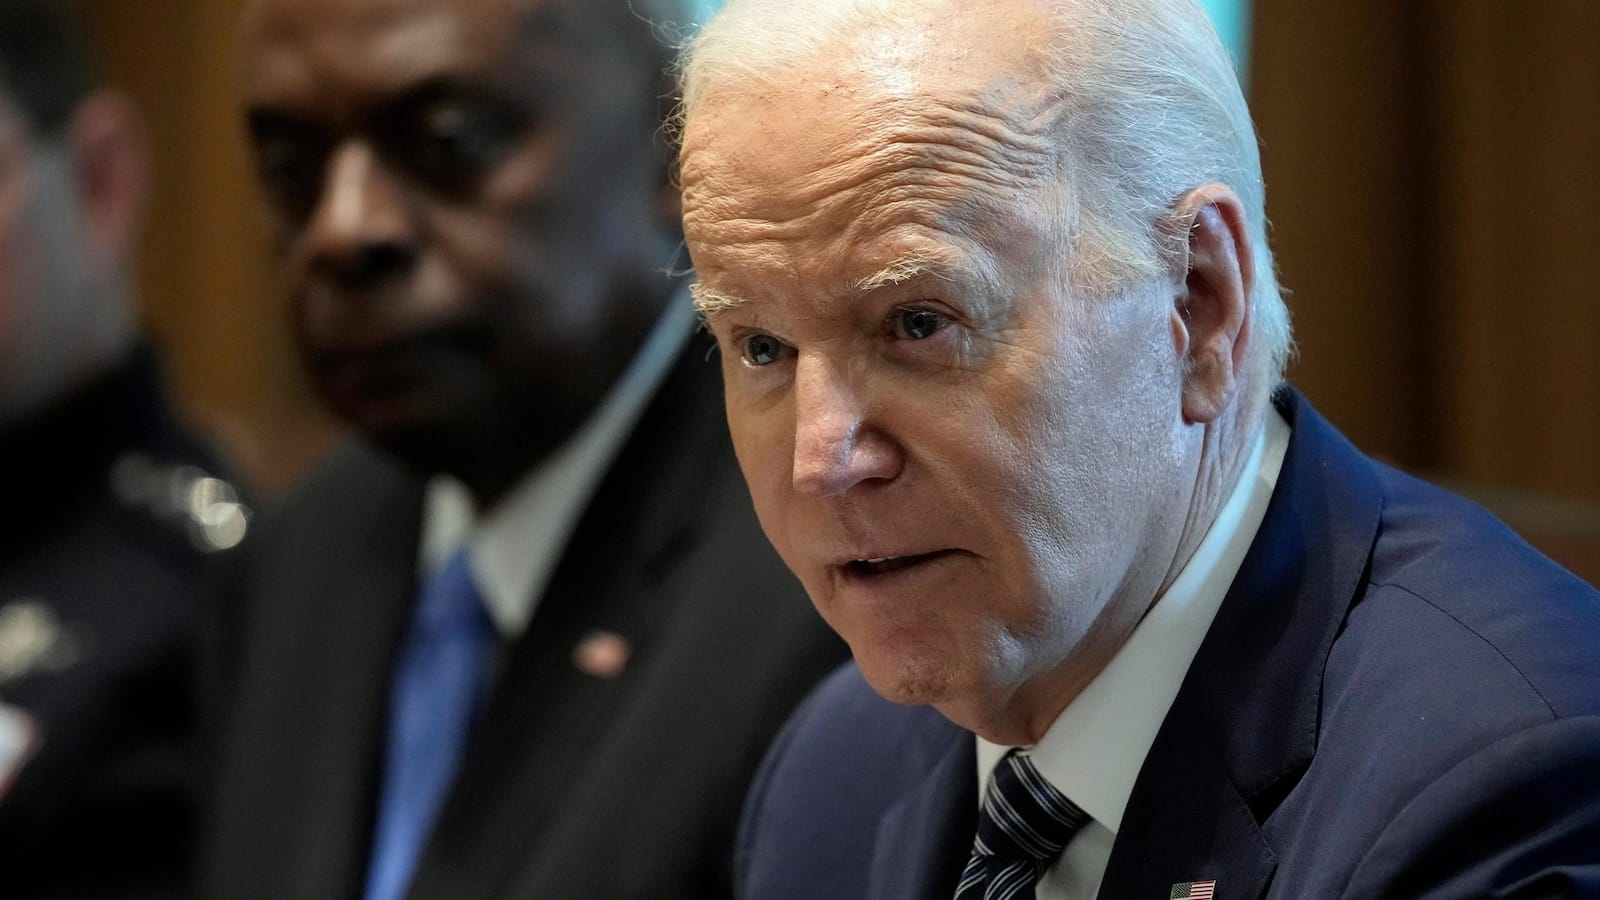 White House blocks release of Biden audio as Republicans move ahead with Garland contempt charge